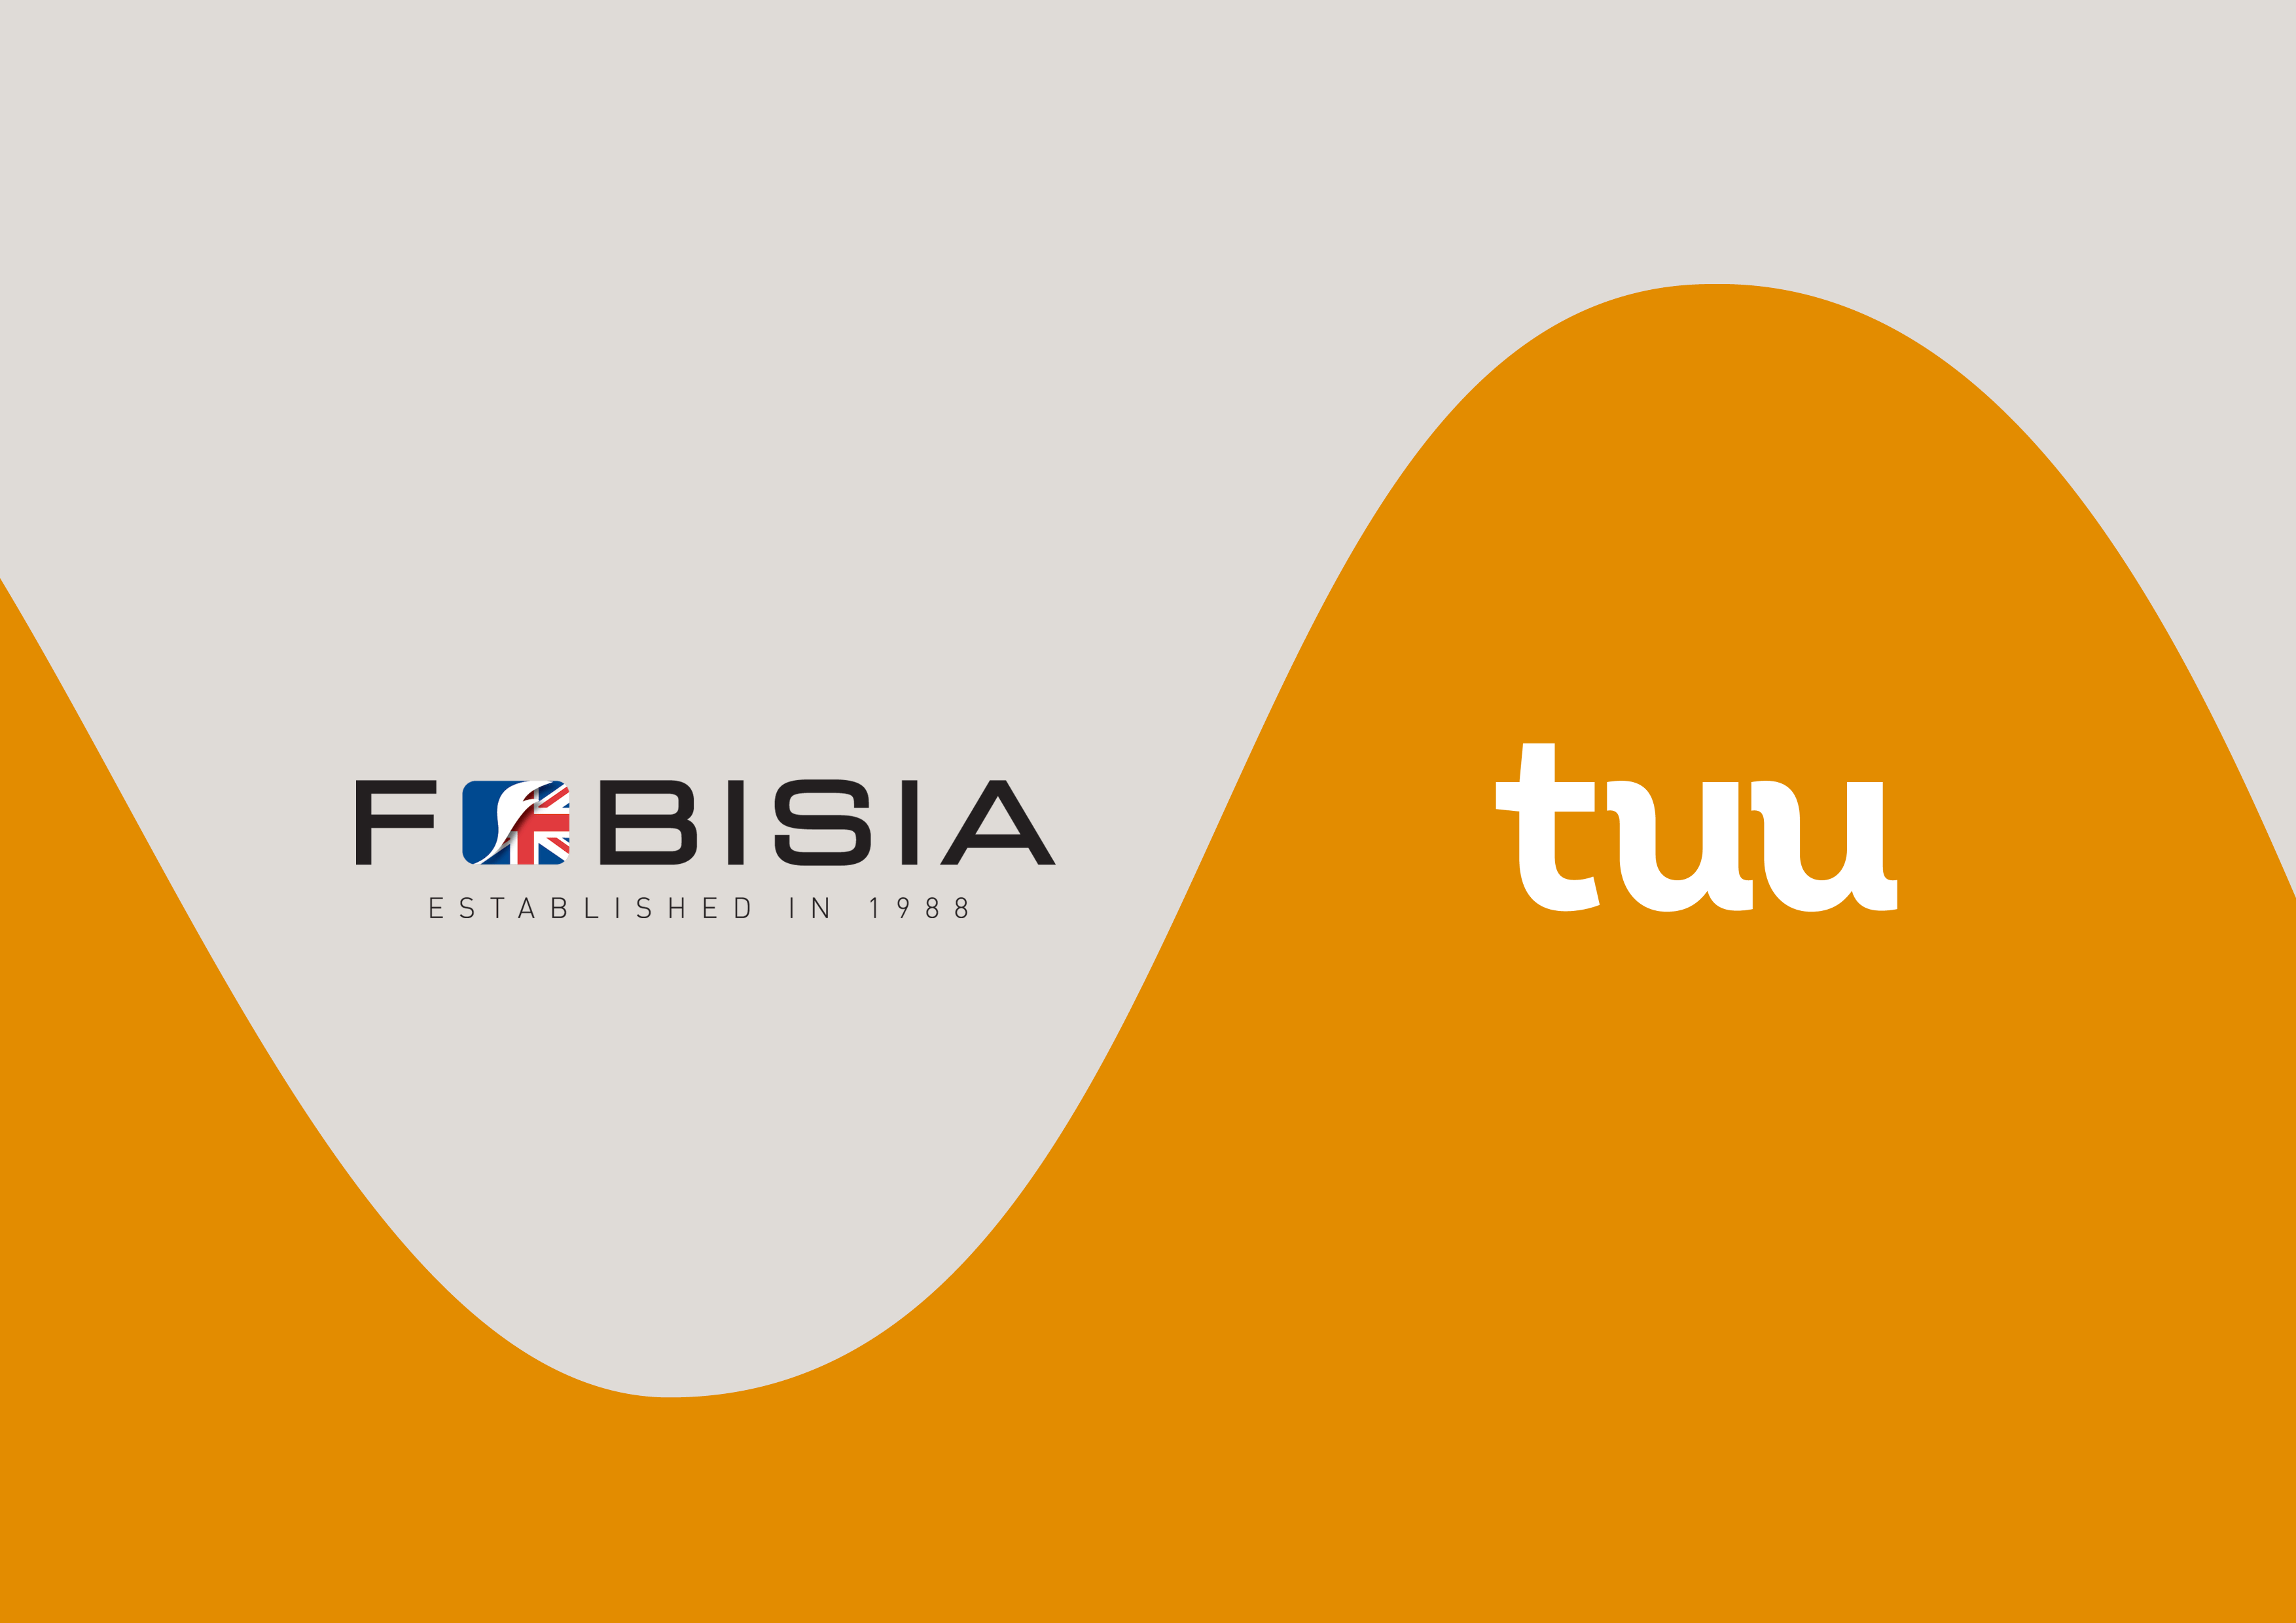 This is an image of the FOBISIA logo and Tuu logo to promote a partnership